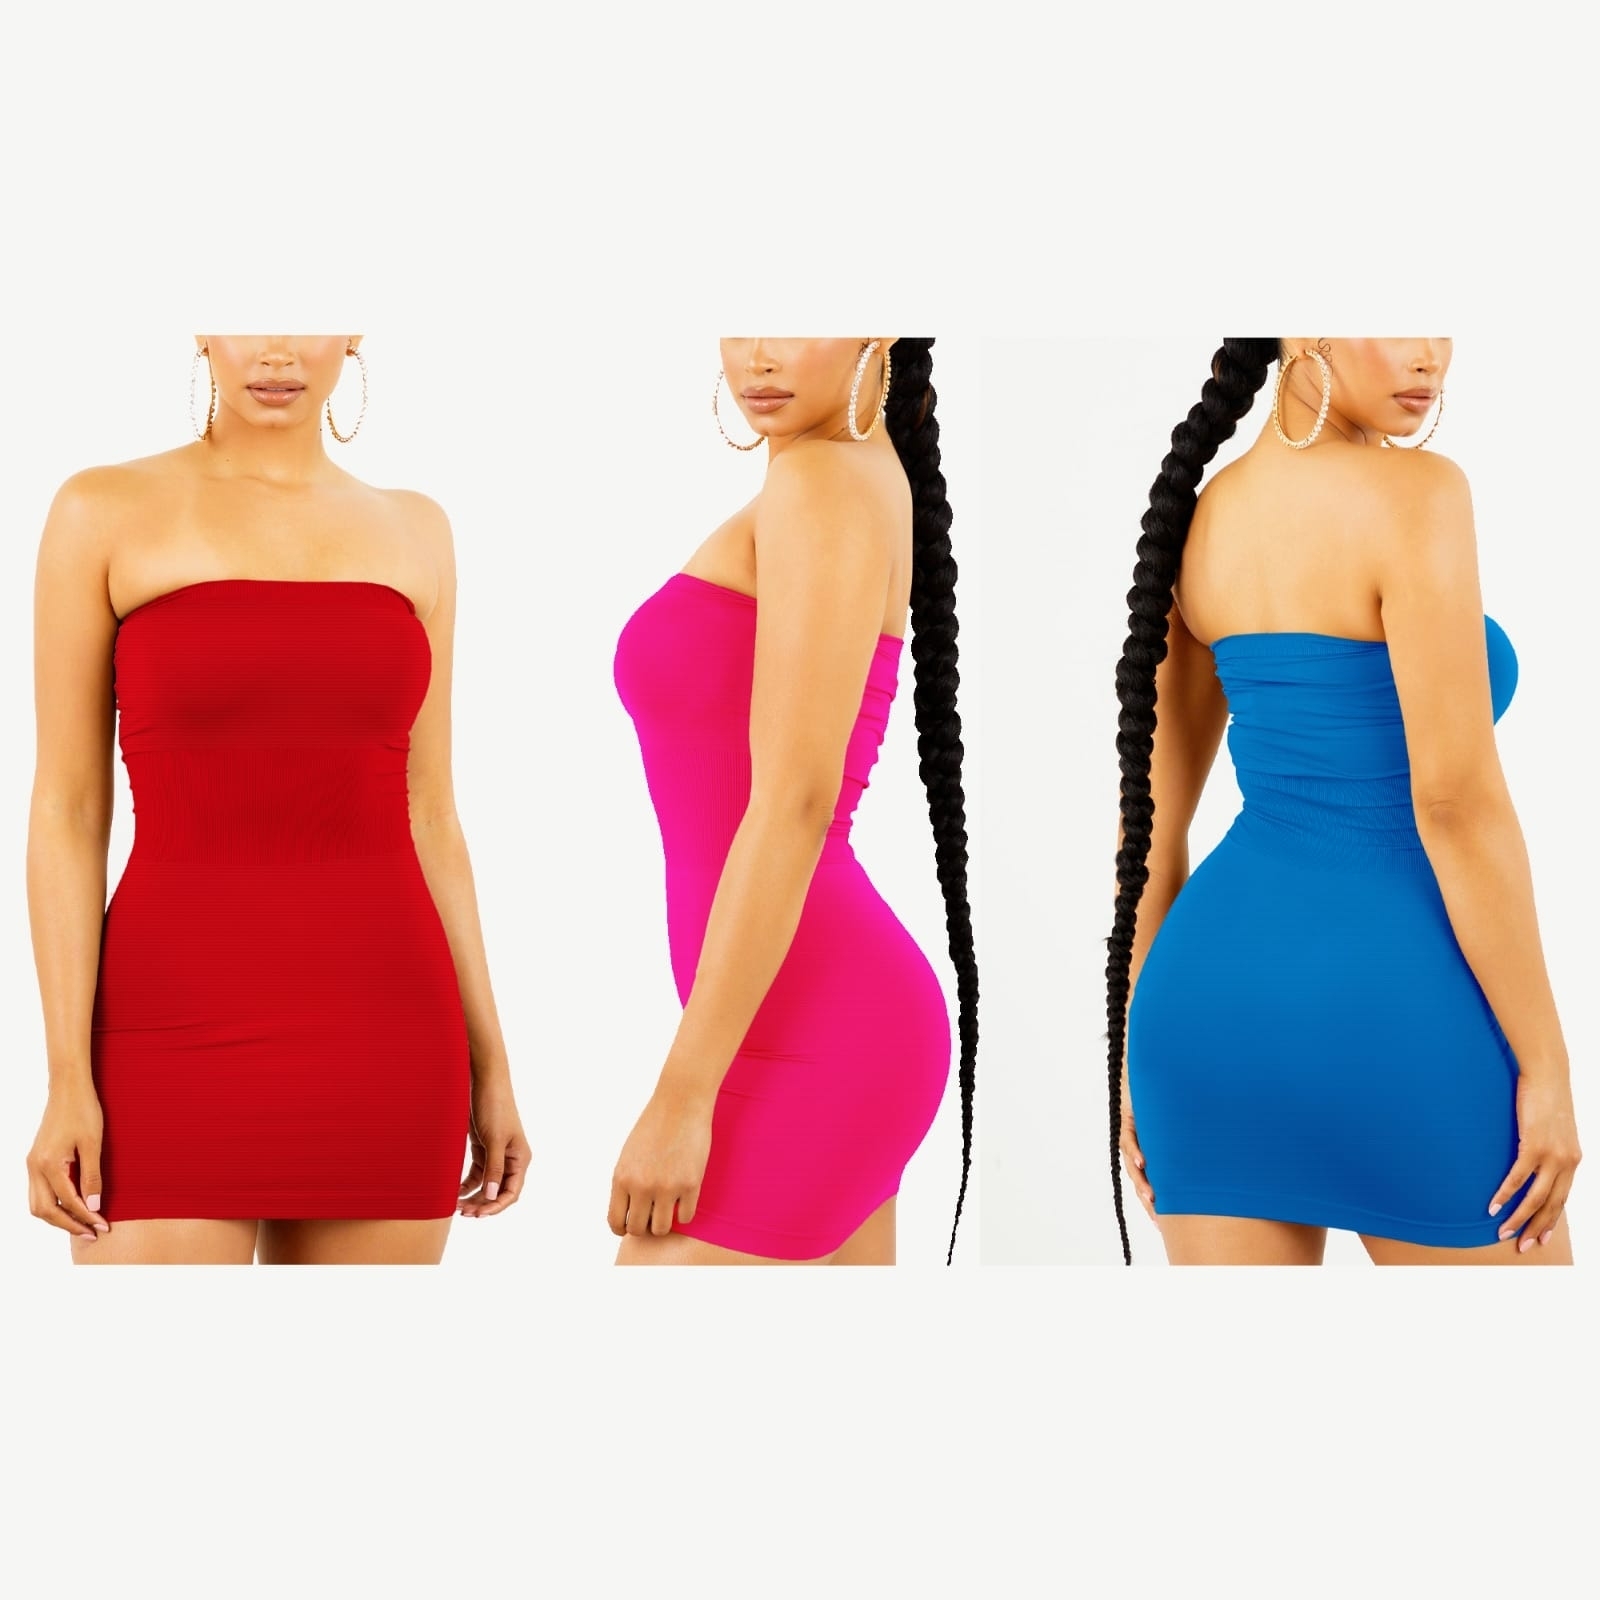 3-Pack Women's Strapless Stretchy Seamless Tight Fit Body Con Mini Tube Top Dress - PINK, XS